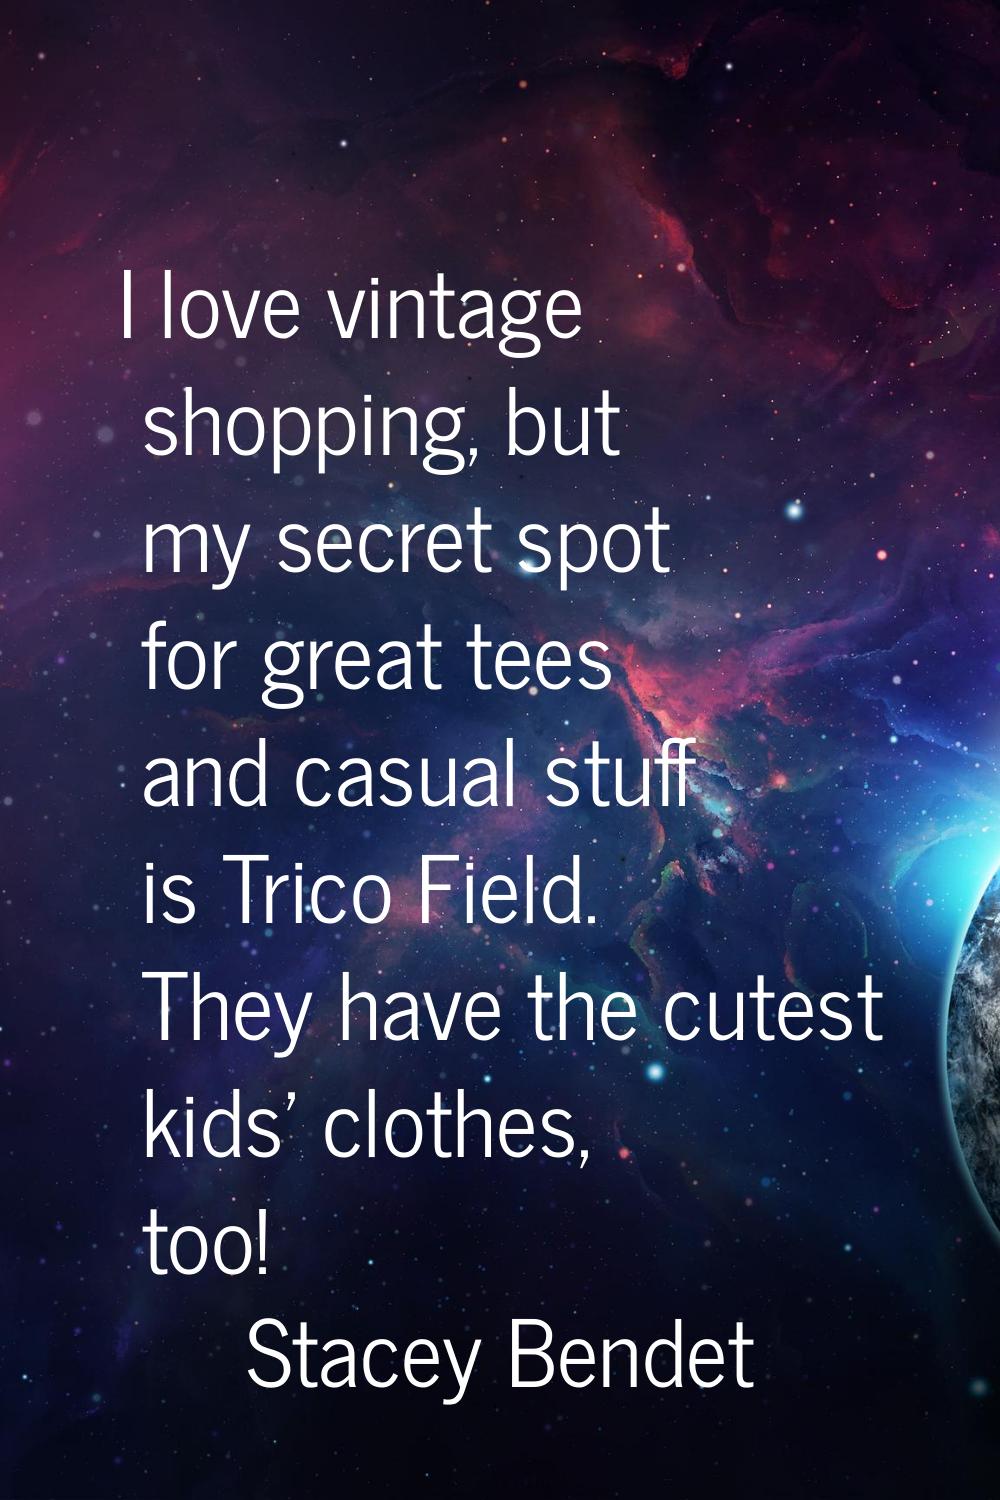 I love vintage shopping, but my secret spot for great tees and casual stuff is Trico Field. They ha